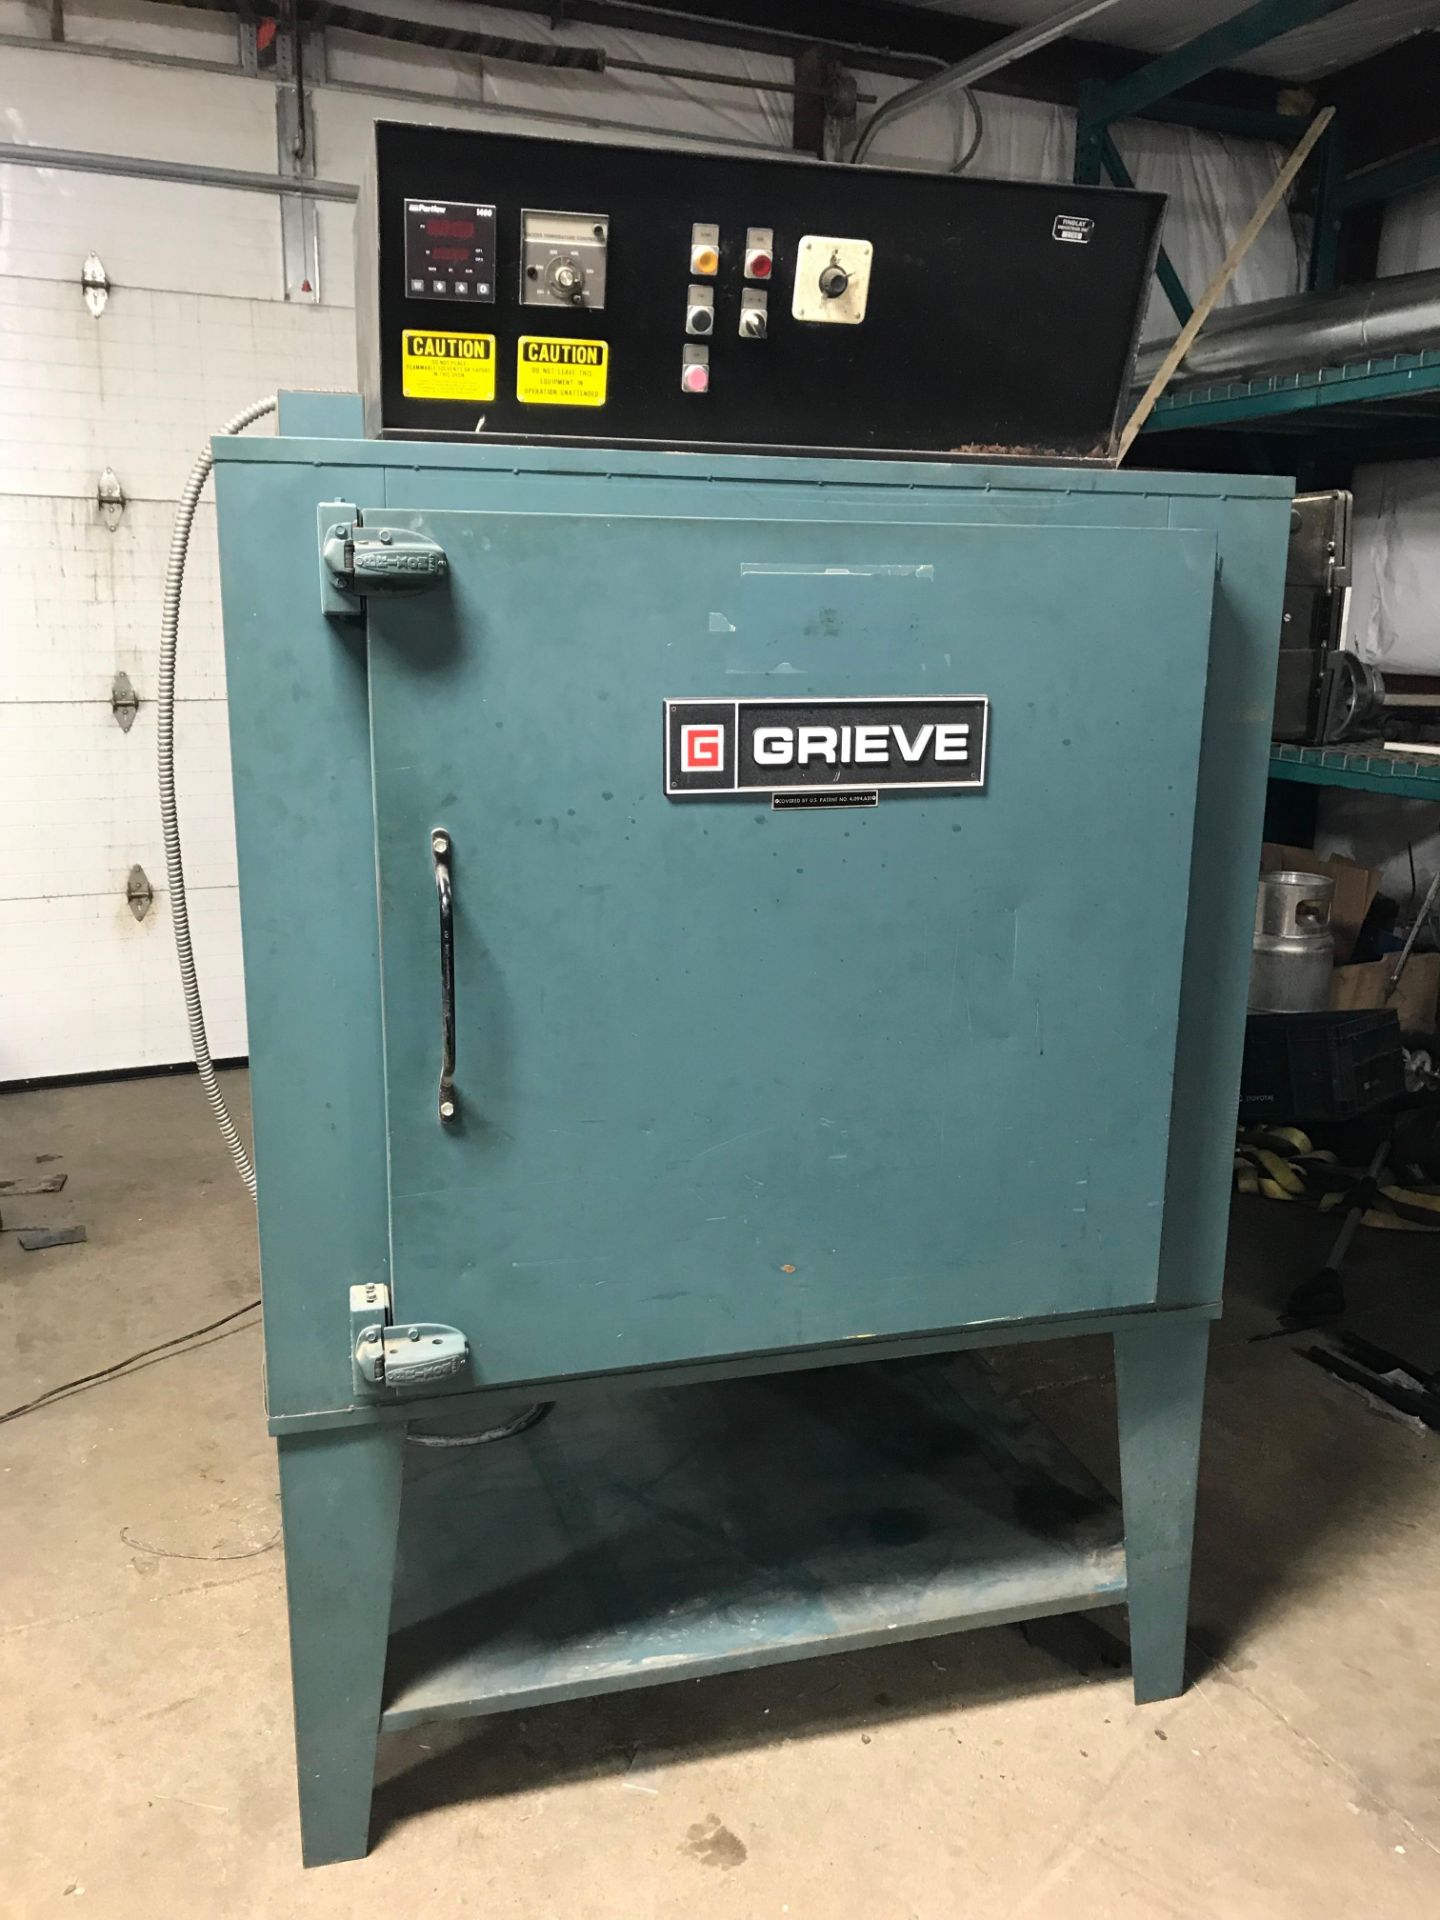 Grieve electric oven